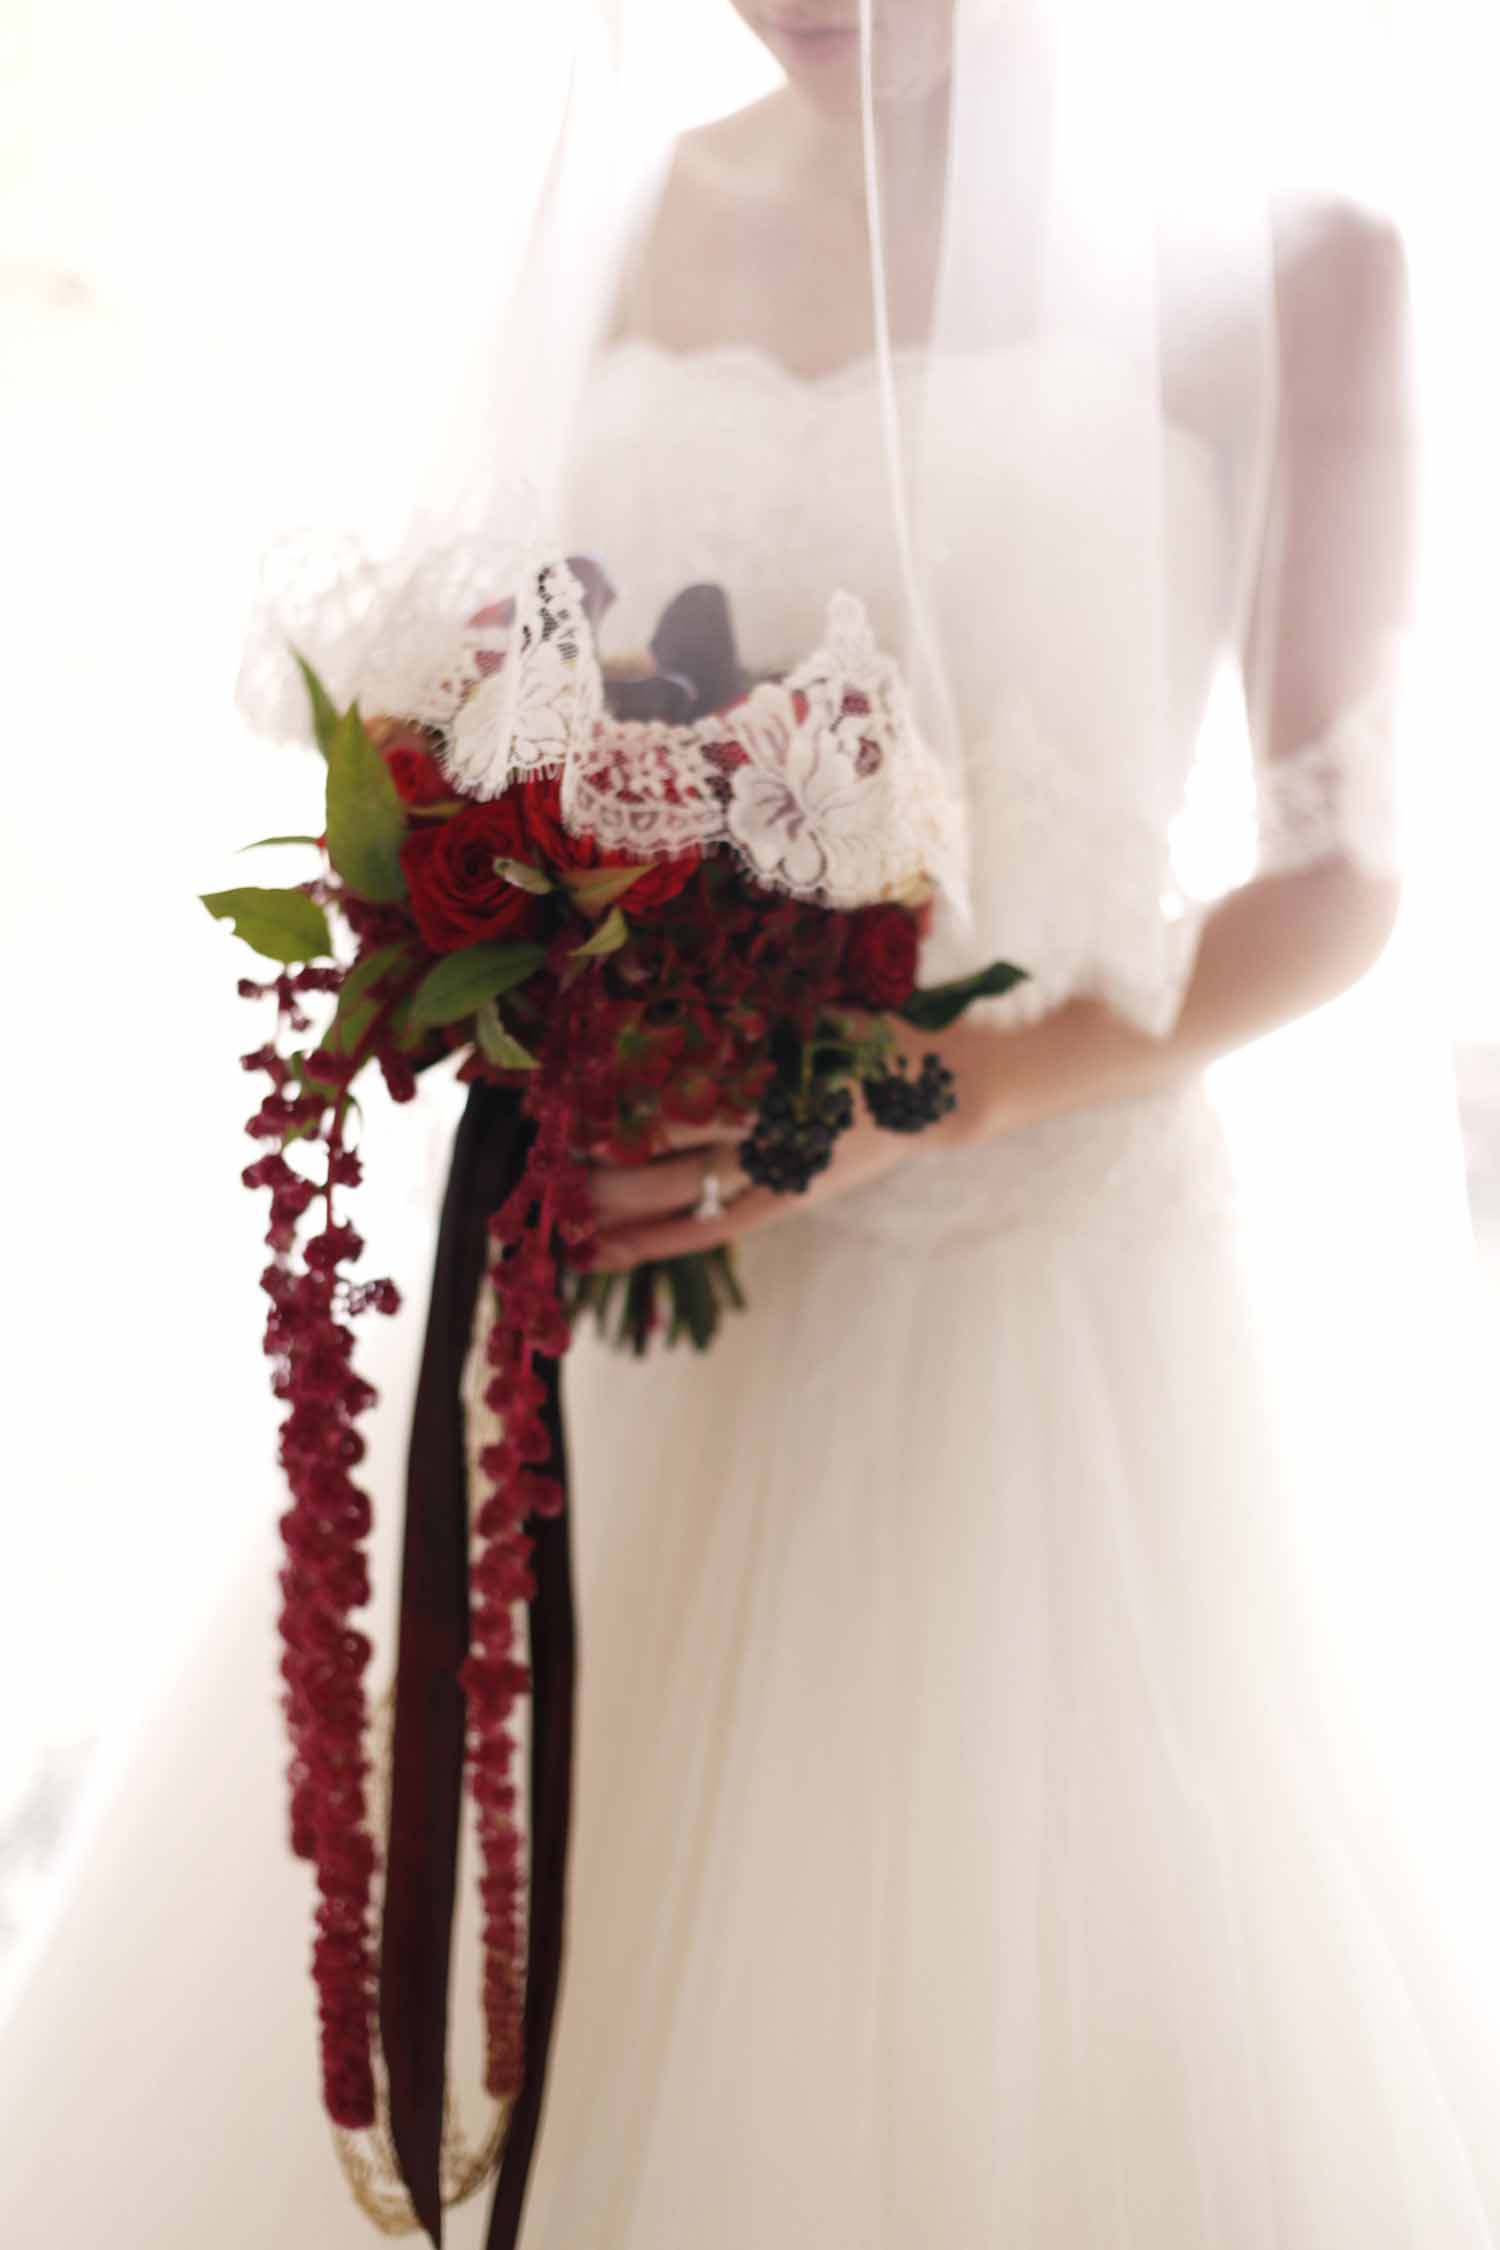 Bride holding bouquet of red roses and red trailing amaranthus - Flora Nova Design Seattle